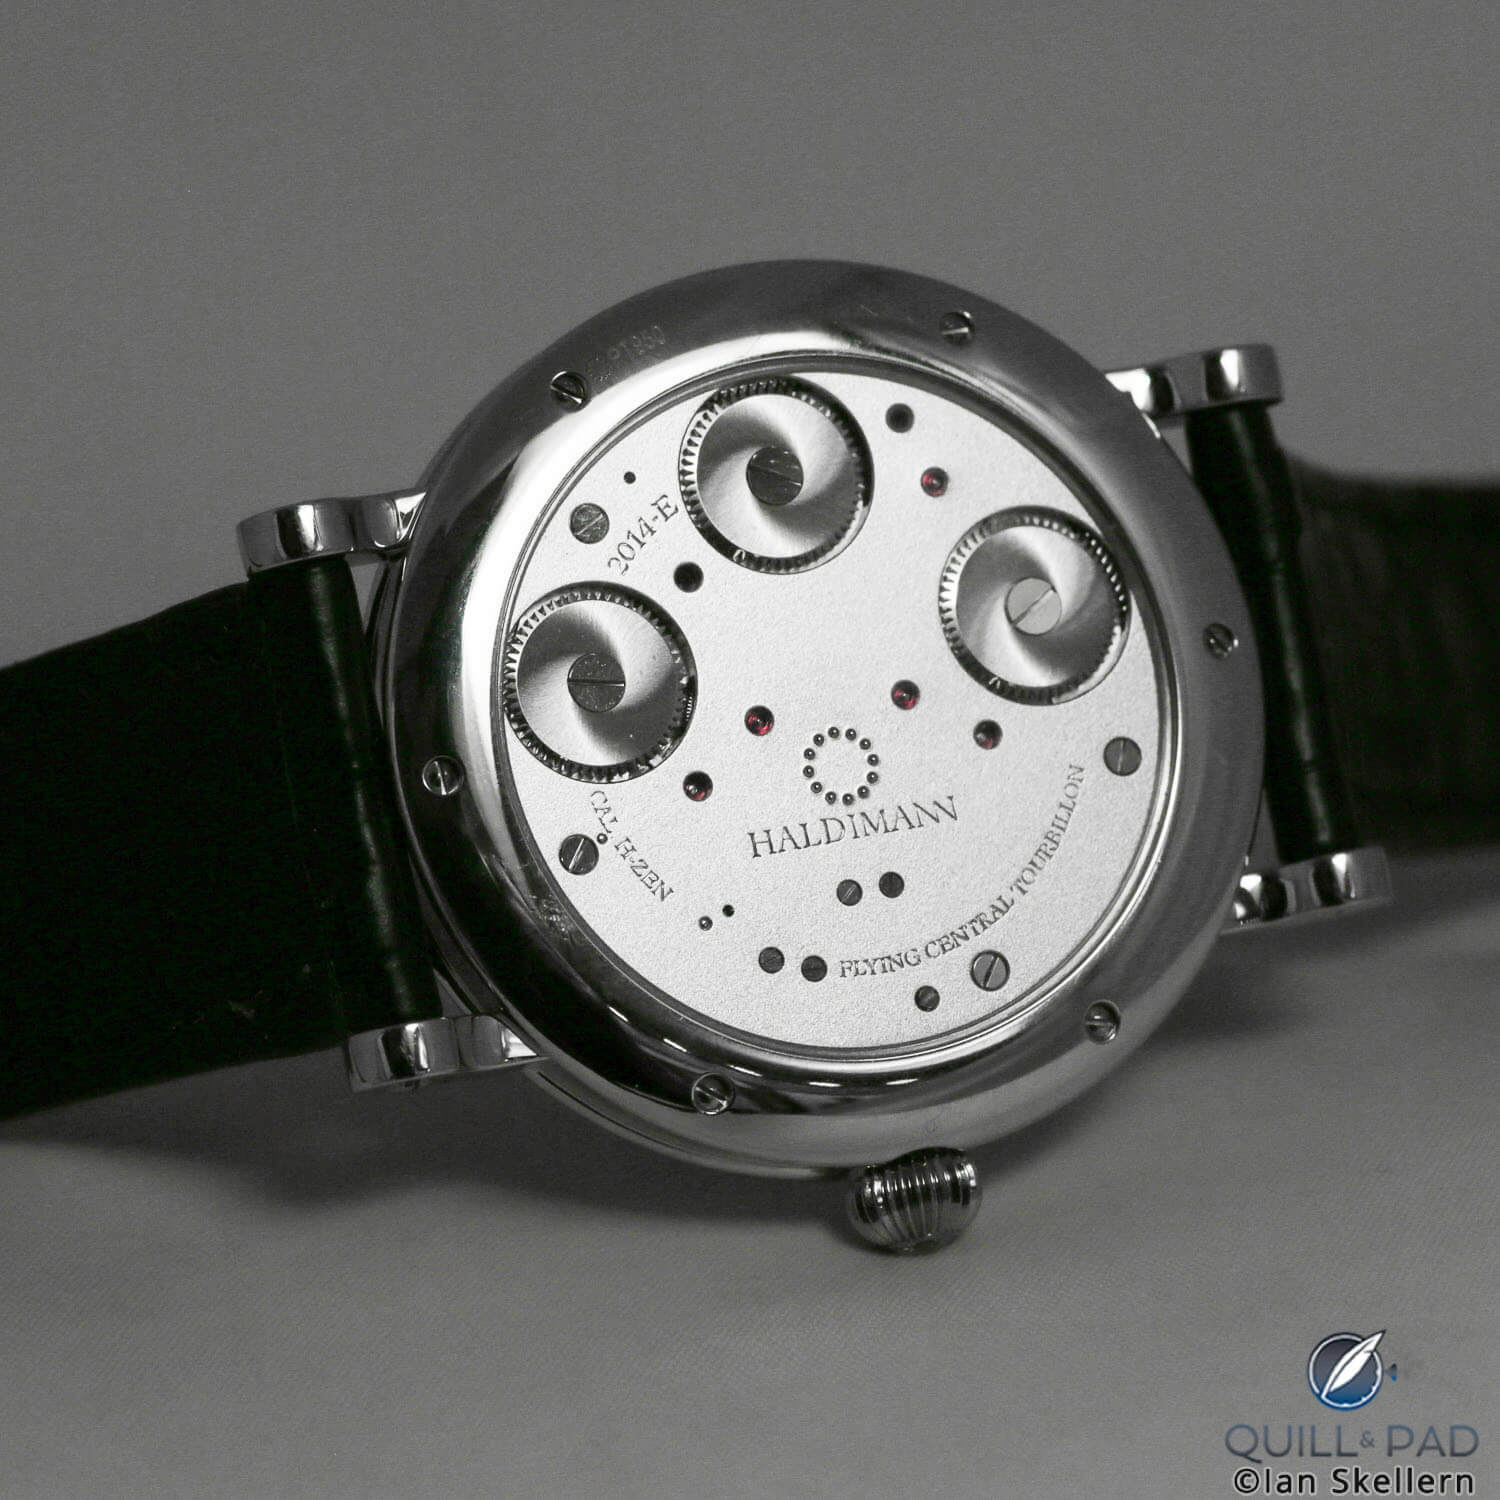 Through the display back to the beautiful hand crafted movement of Beat Haldimann's H1 Stars 